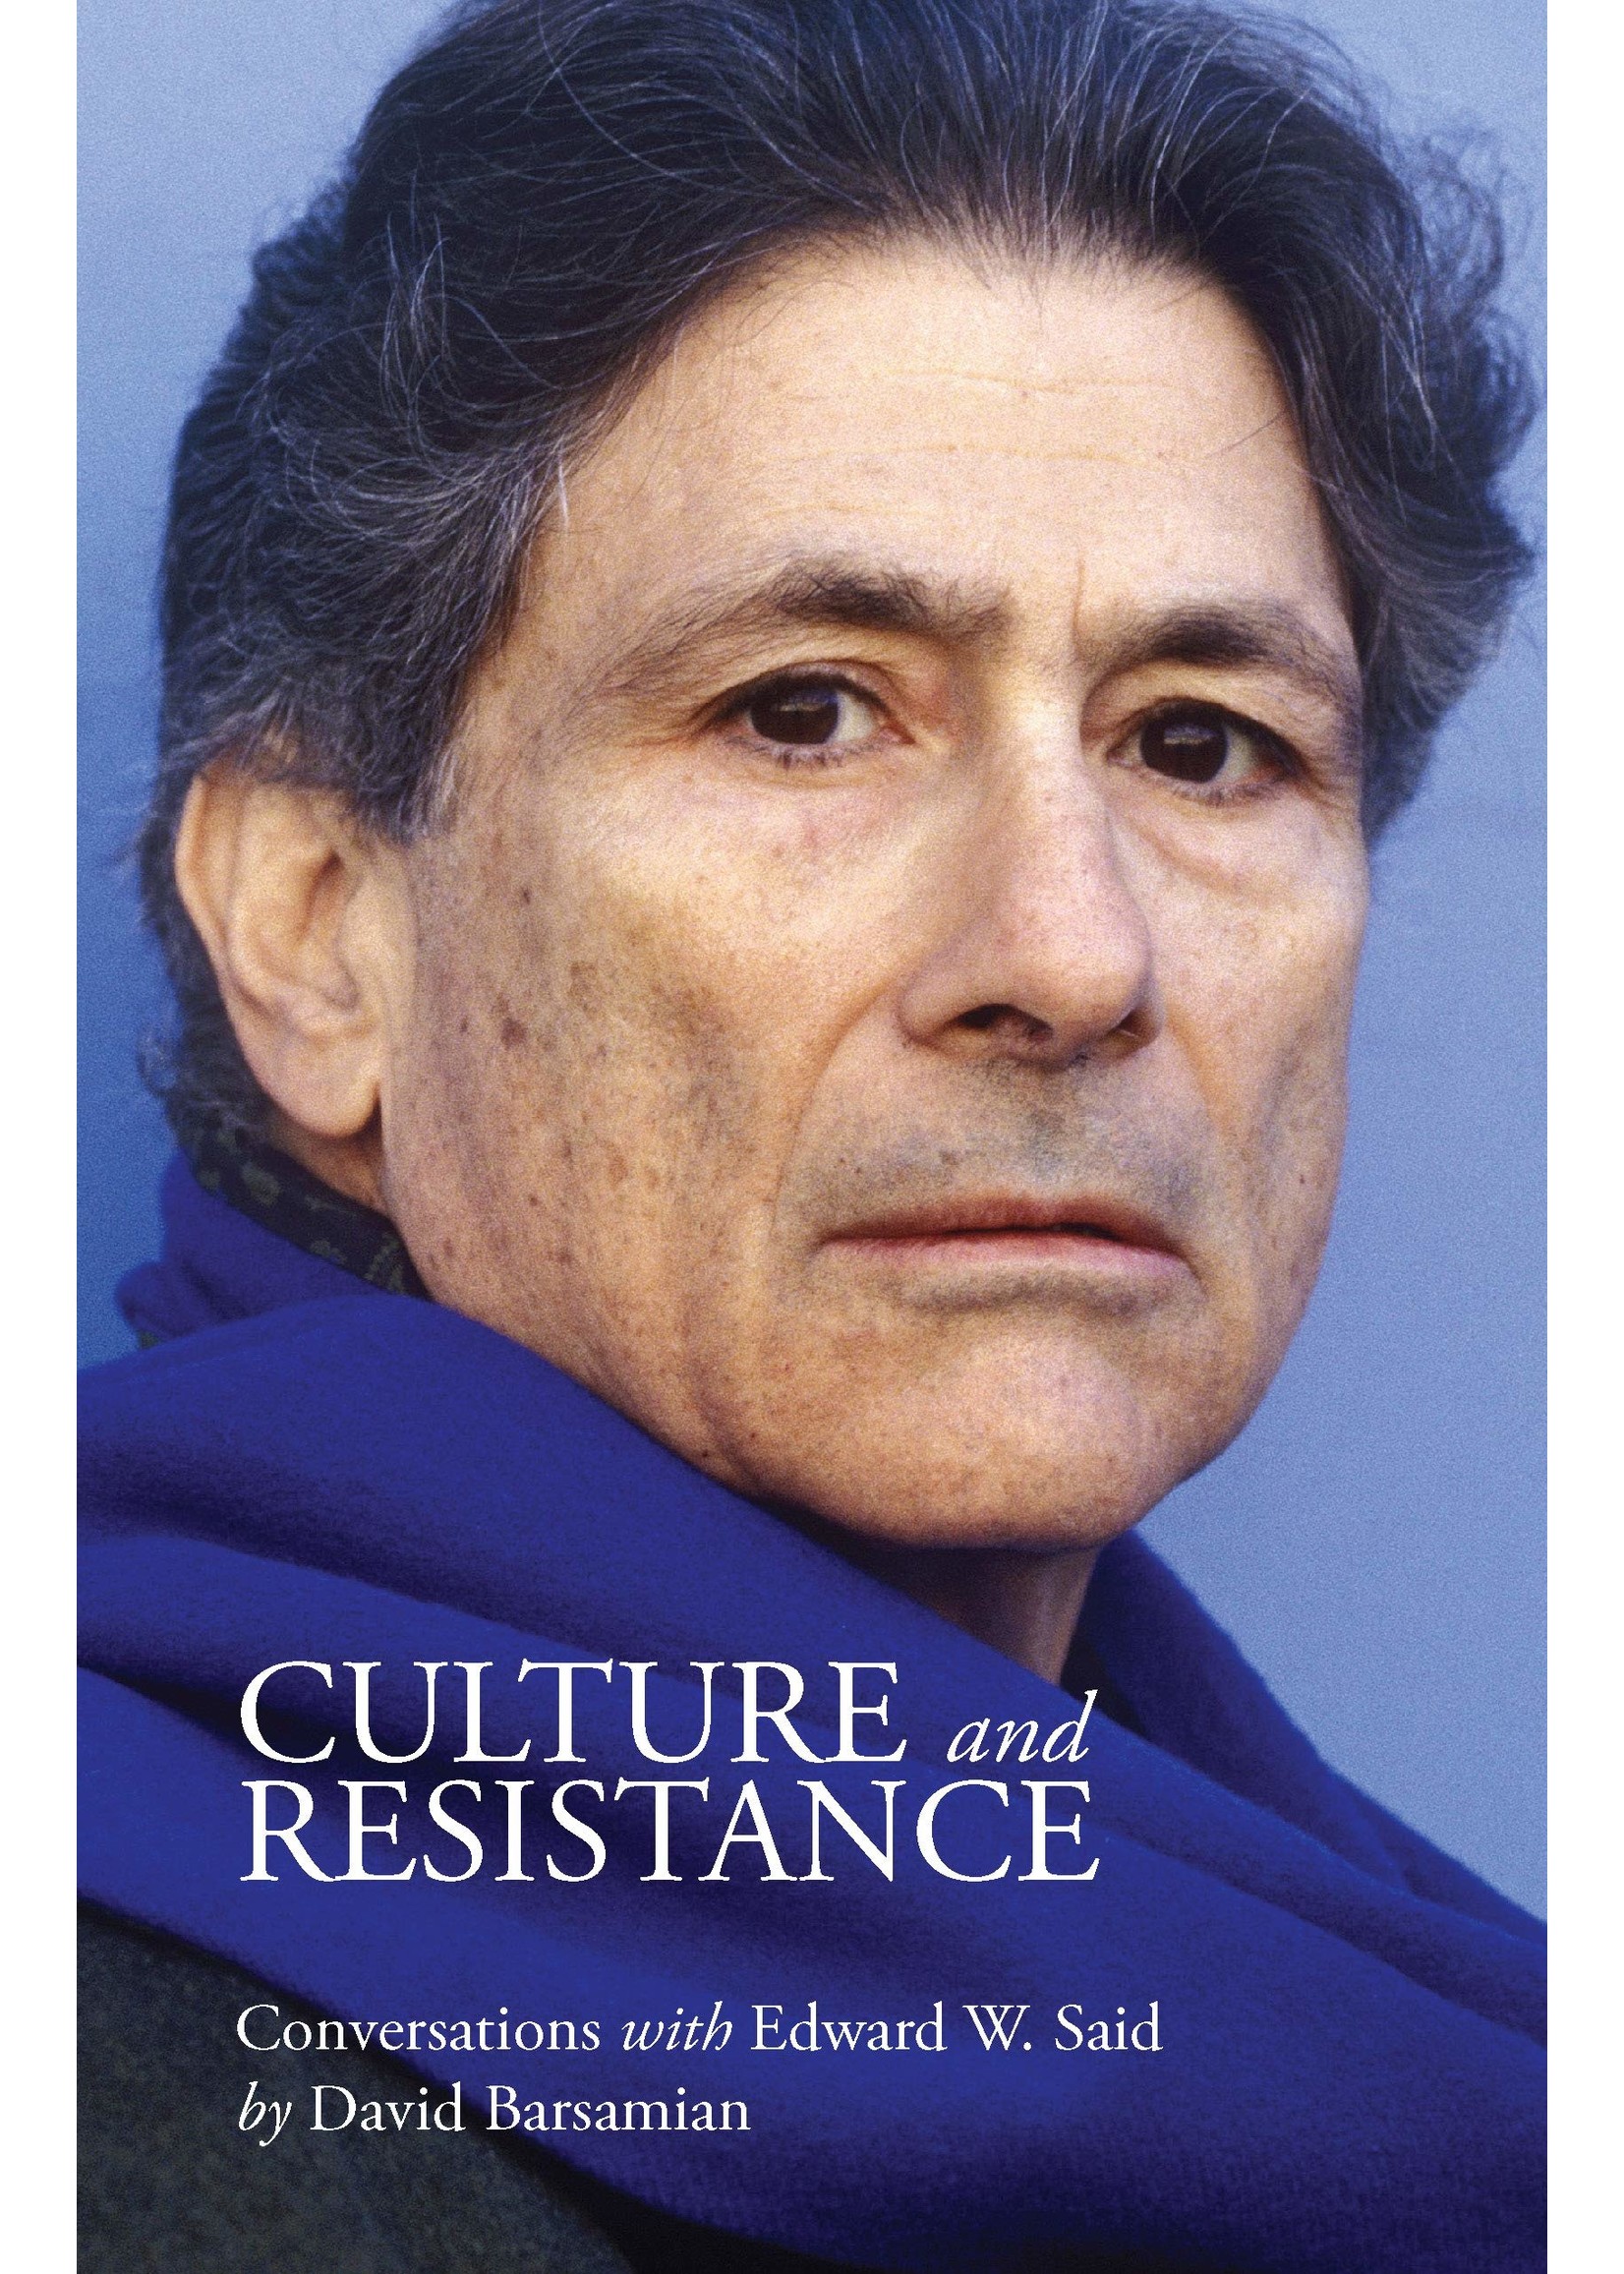 Culture and Resistance - Edward Said